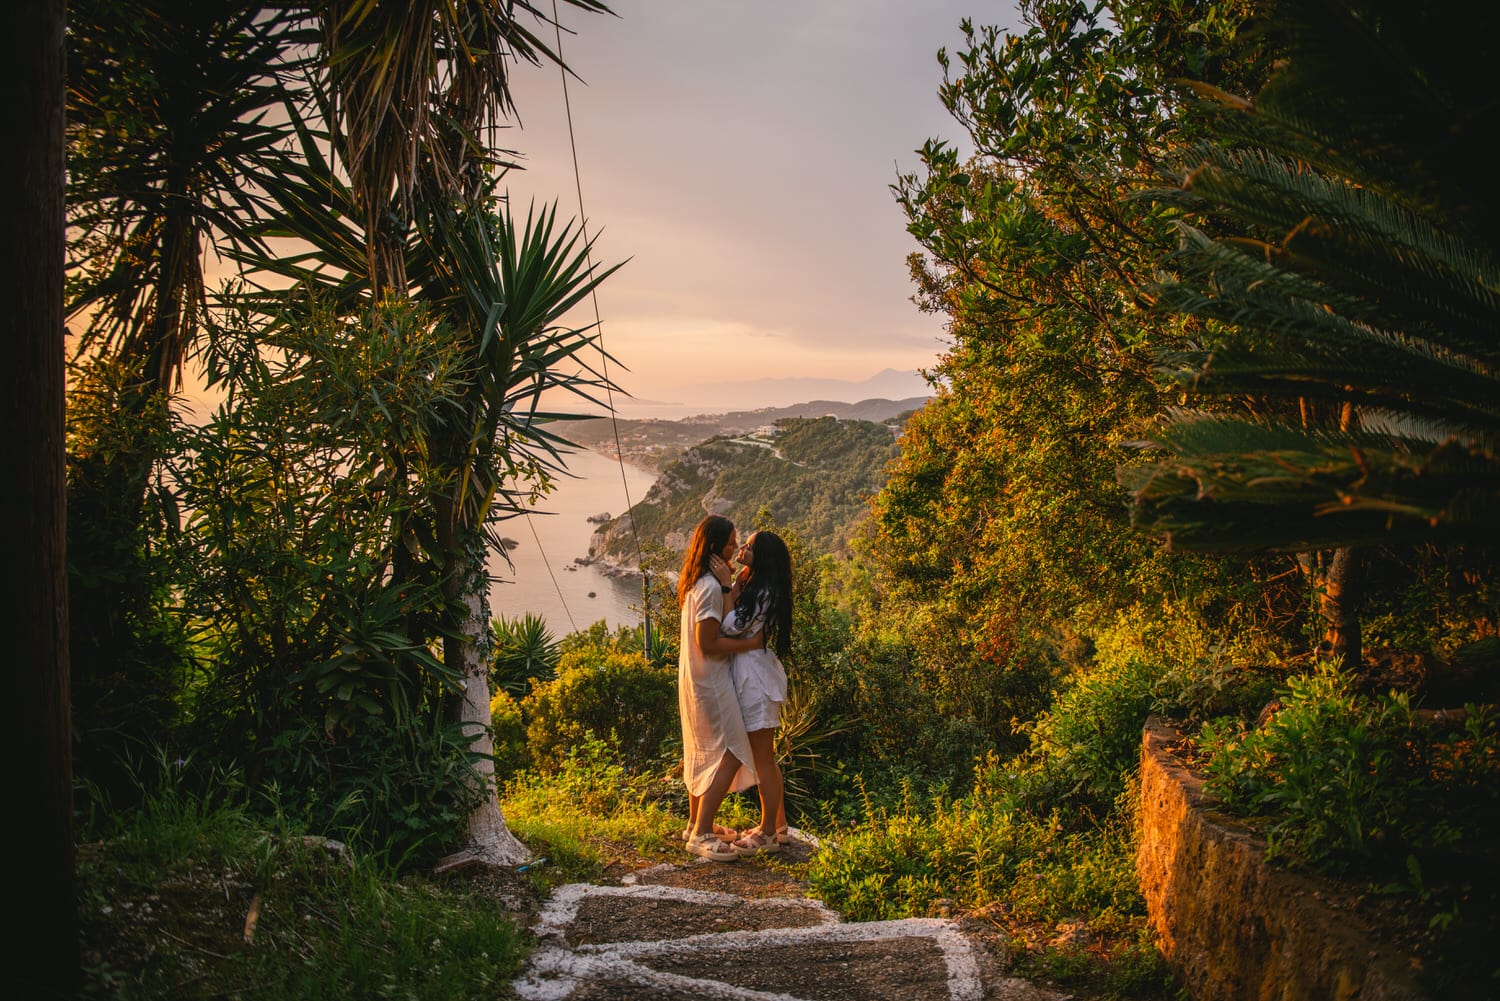 The best places to elope: 70+ ideas in the world for introverts